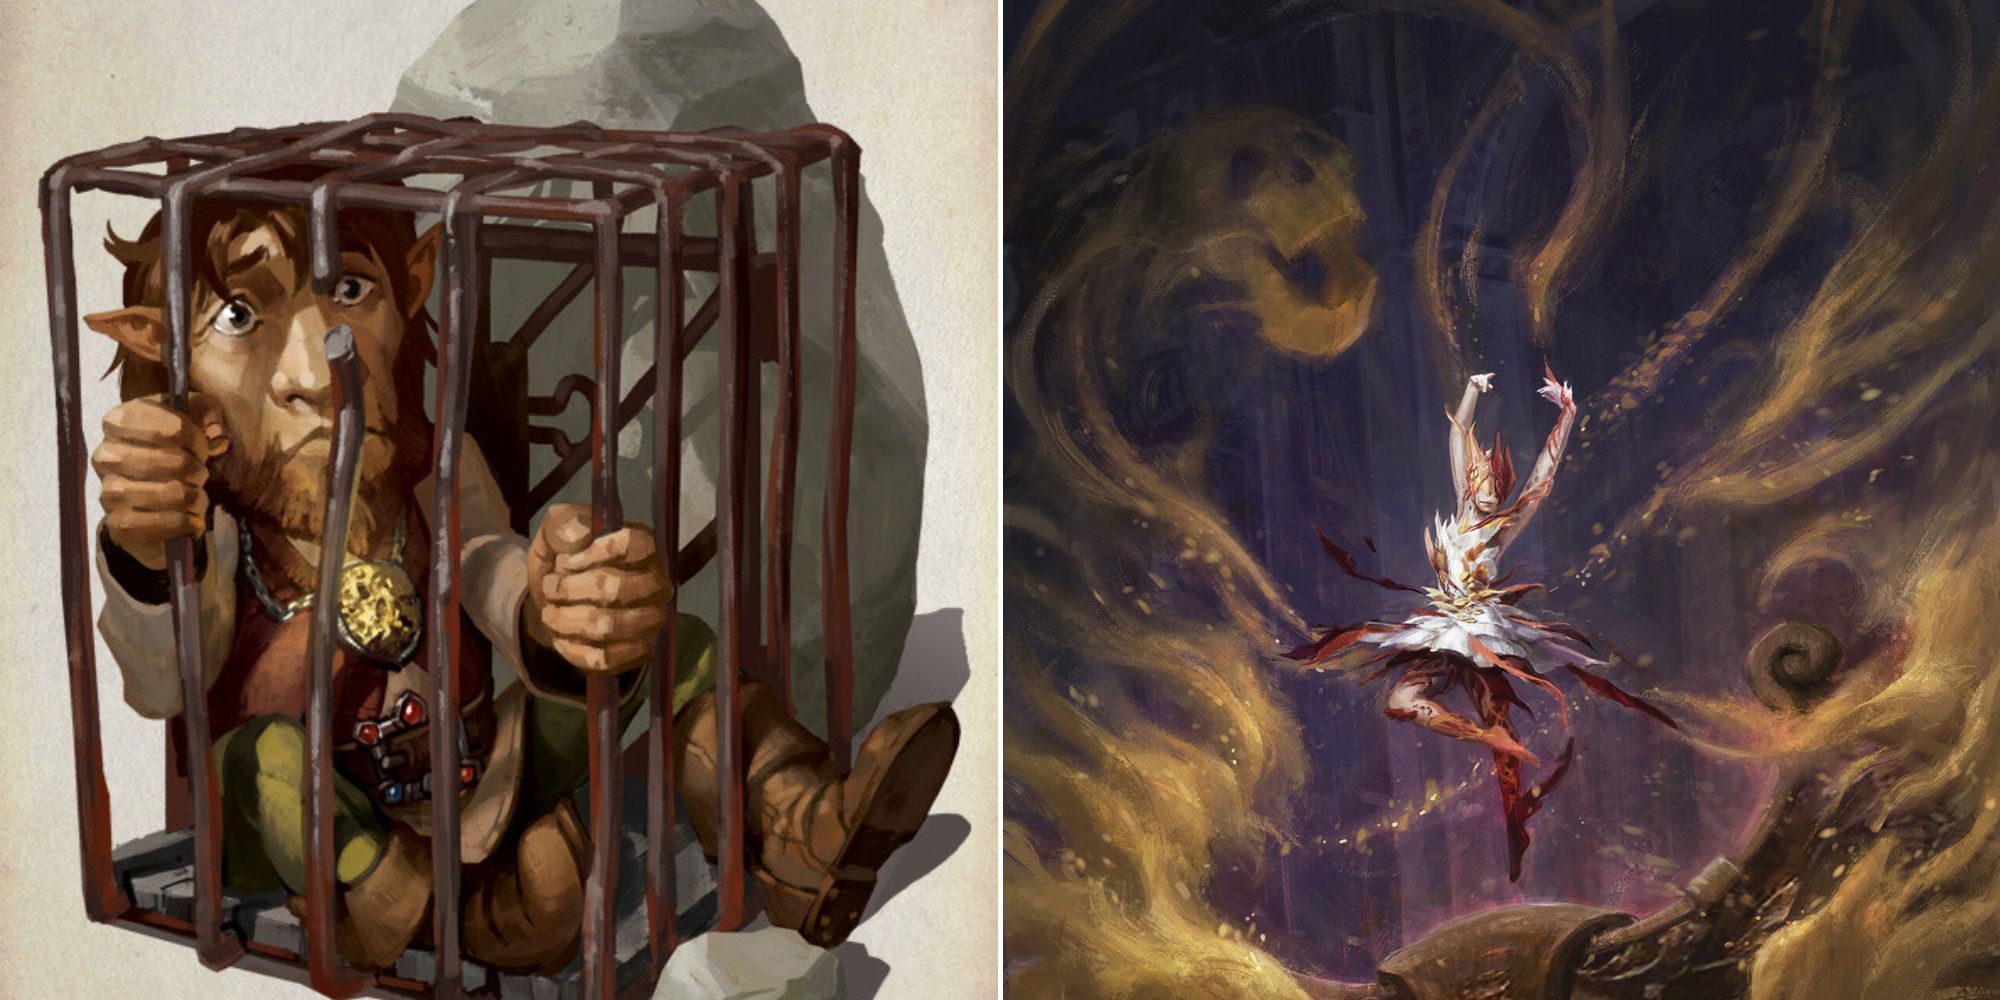 A character trapped in a small cage and a fairy surrounded by spirits in Dungeons And Dragons